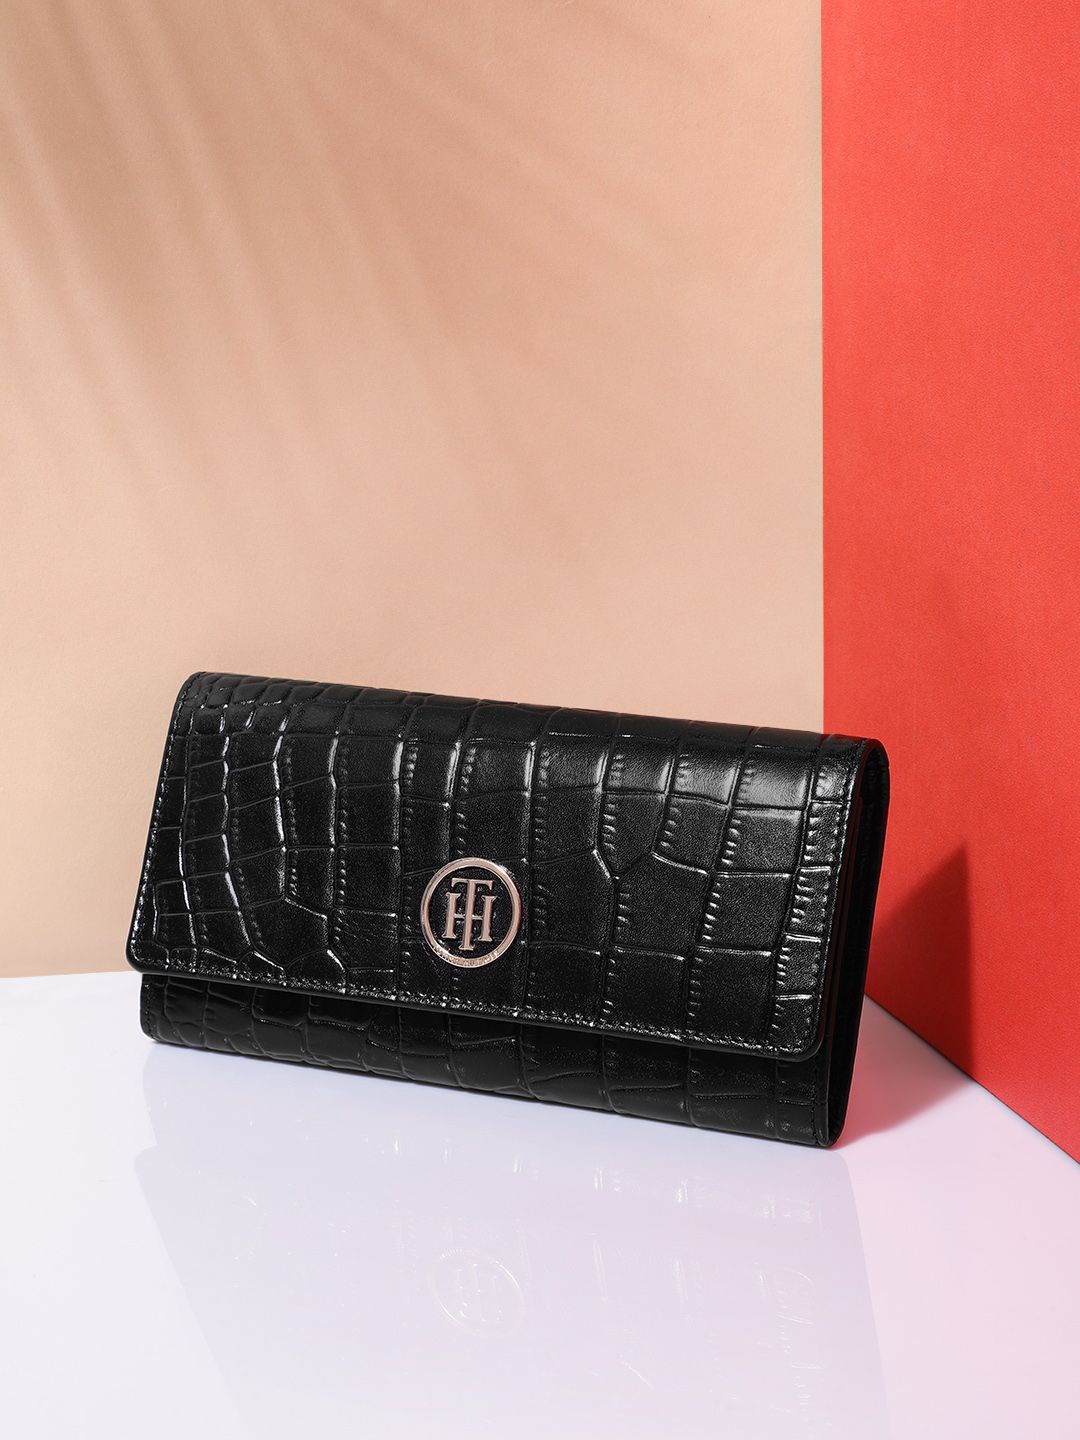 Tommy Hilfiger Women Black Croc-Textured Leather Two Fold Wallet Price in India